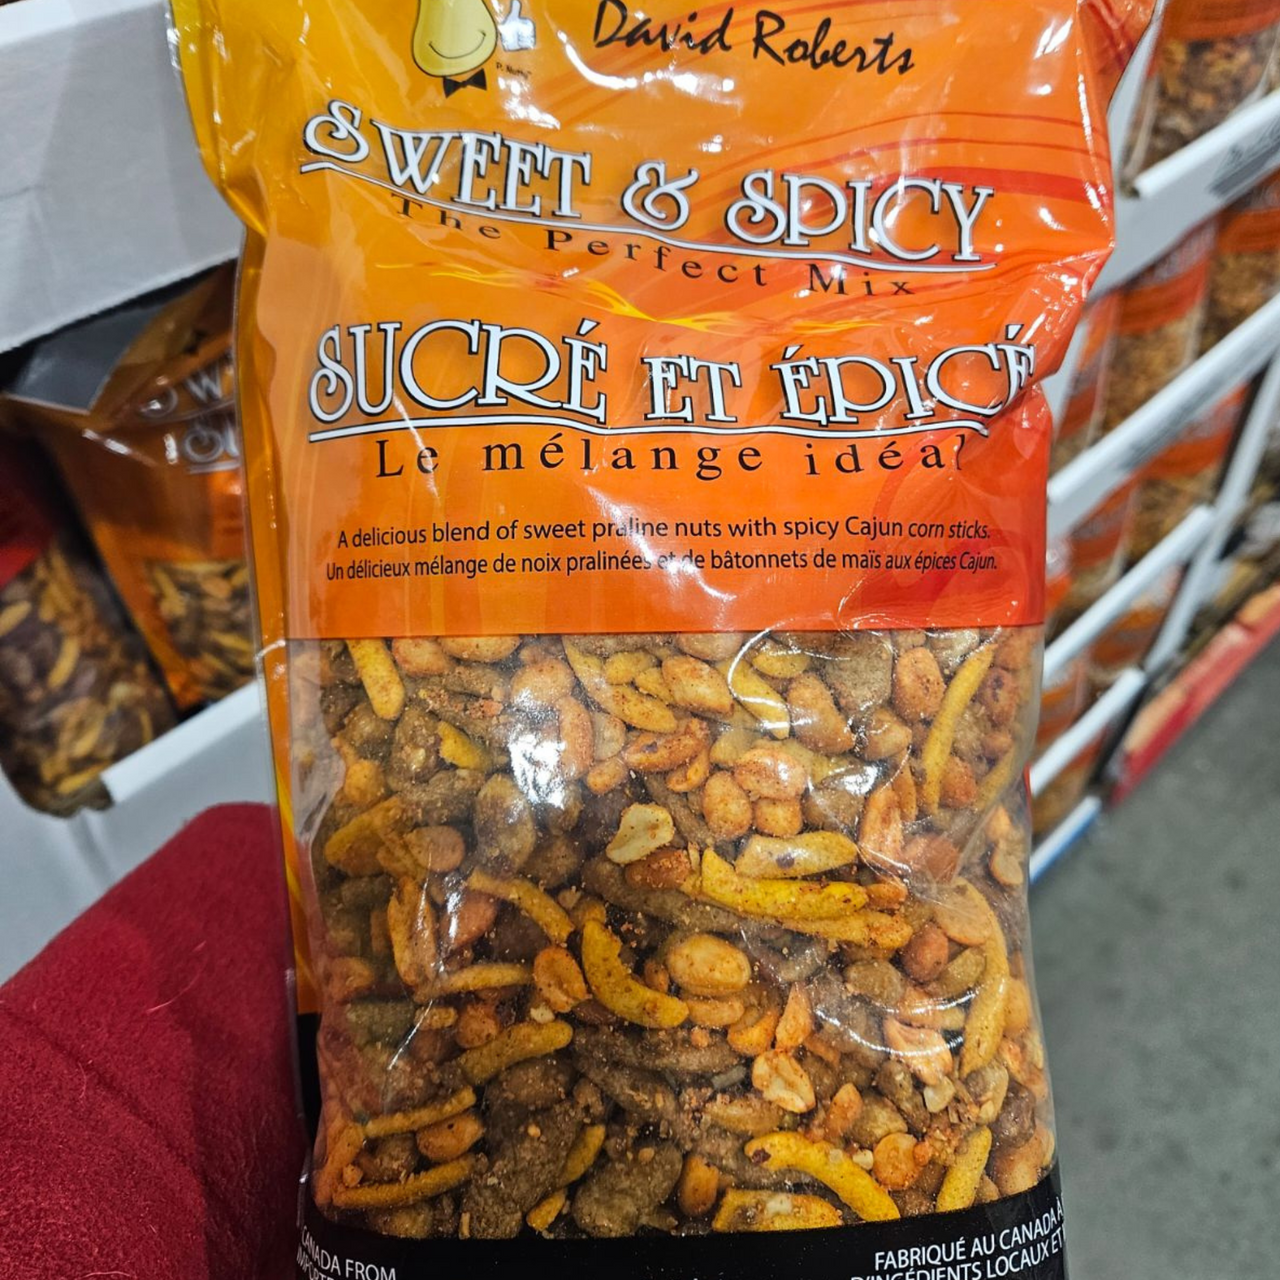 Image of David Roberts Sweet and Spicy Nut Mix